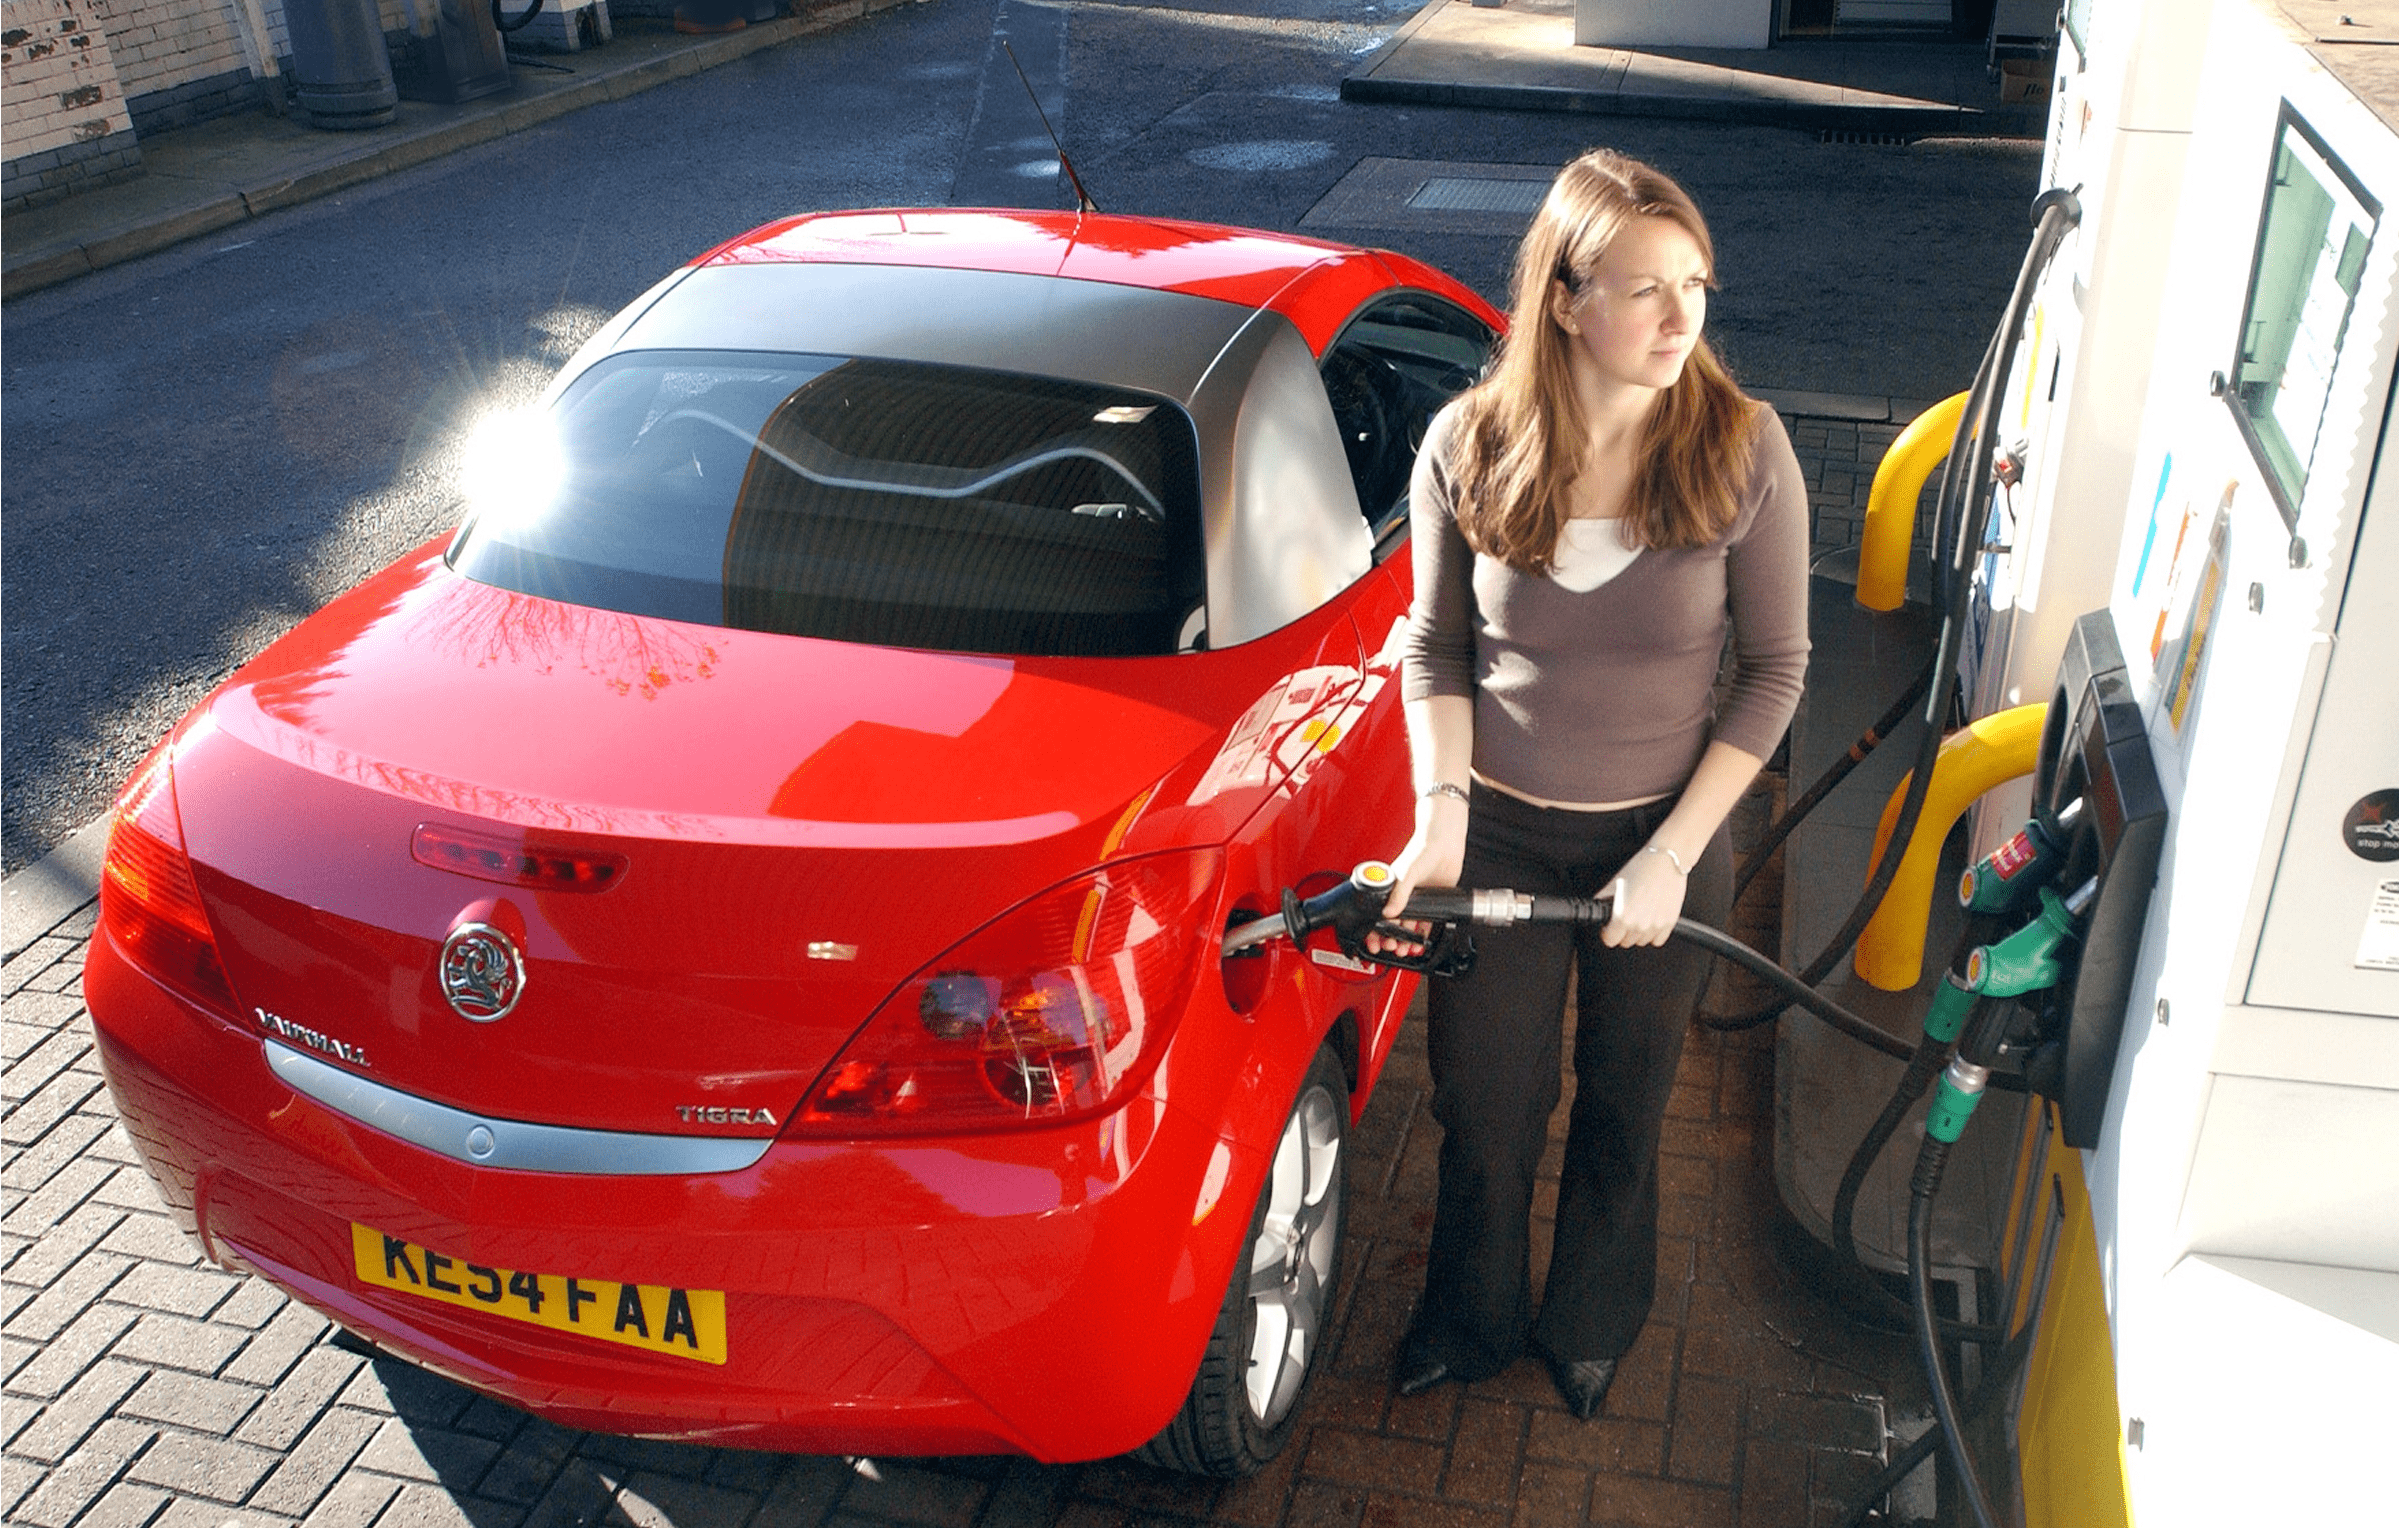 Woman filling up a red car with fuel at a a filling station